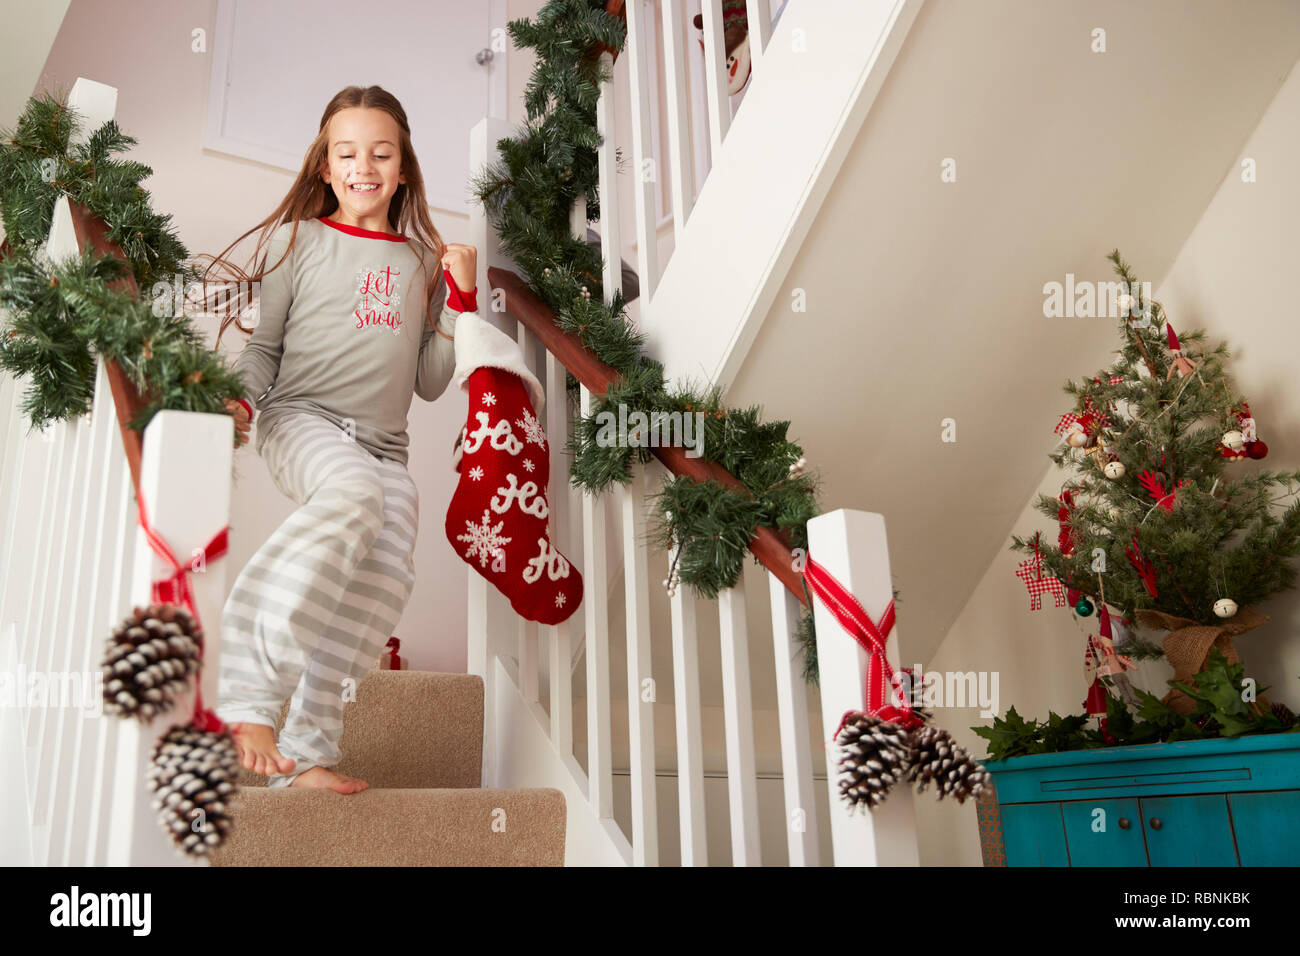 Excited Girl Wearing Pajamas Running Down Stairs Holding Stockings On Christmas Morning Stock Photo